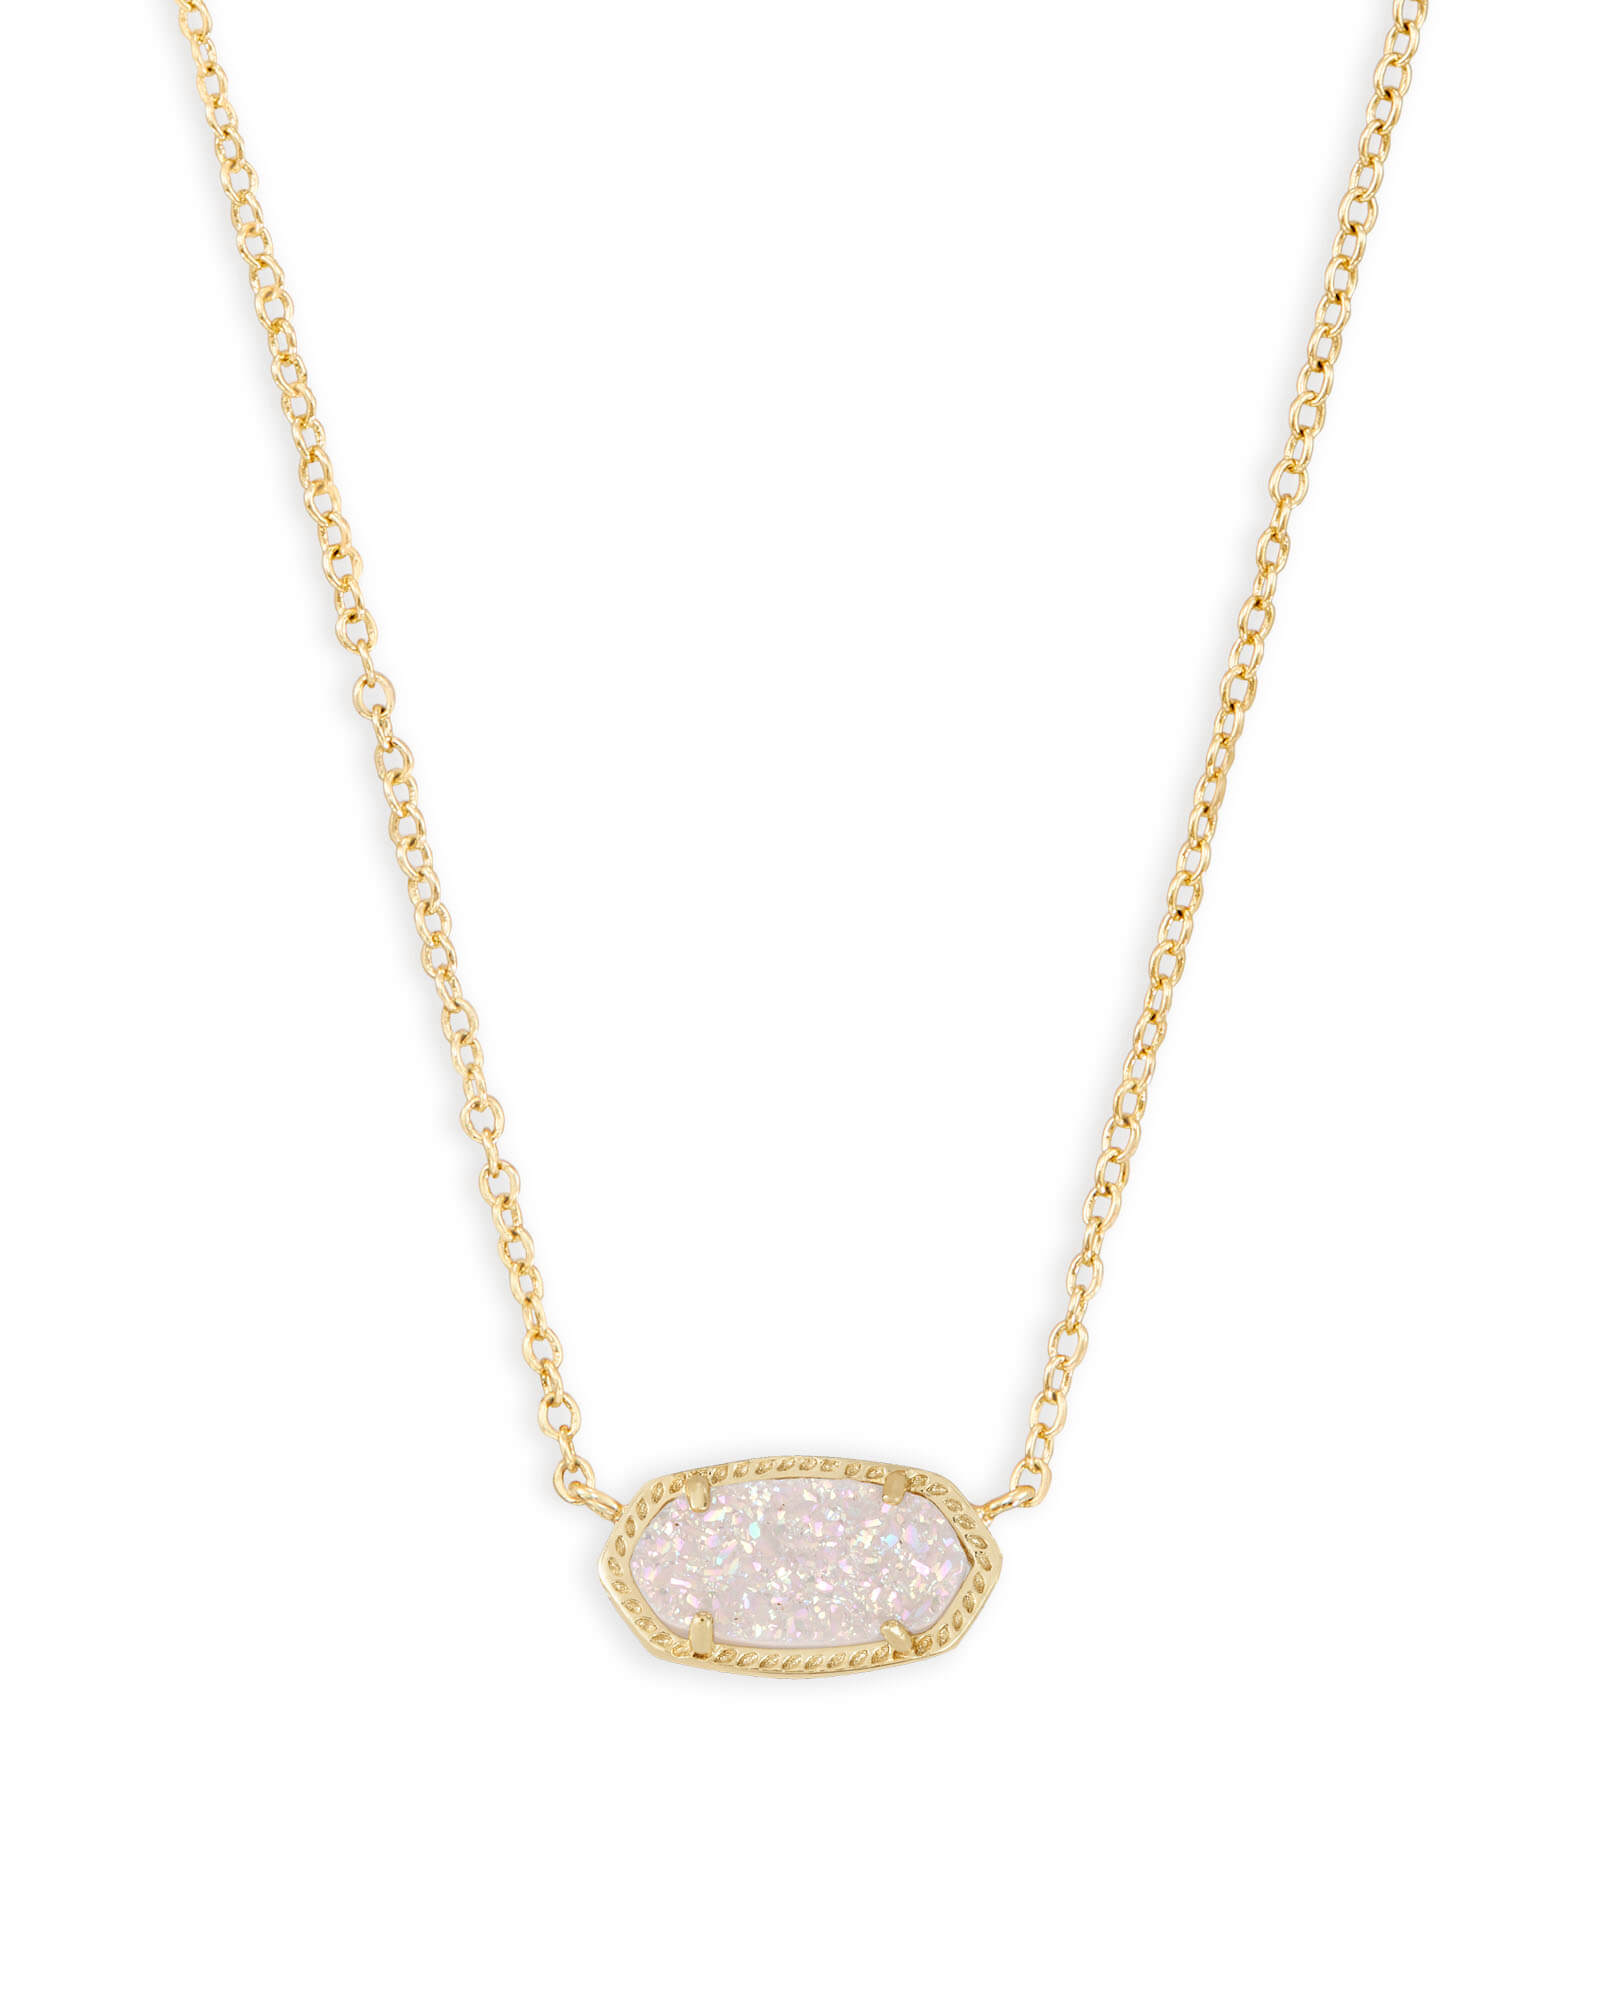 Kendra Scott Lindy Crystal Chain Necklace | Nordstrom